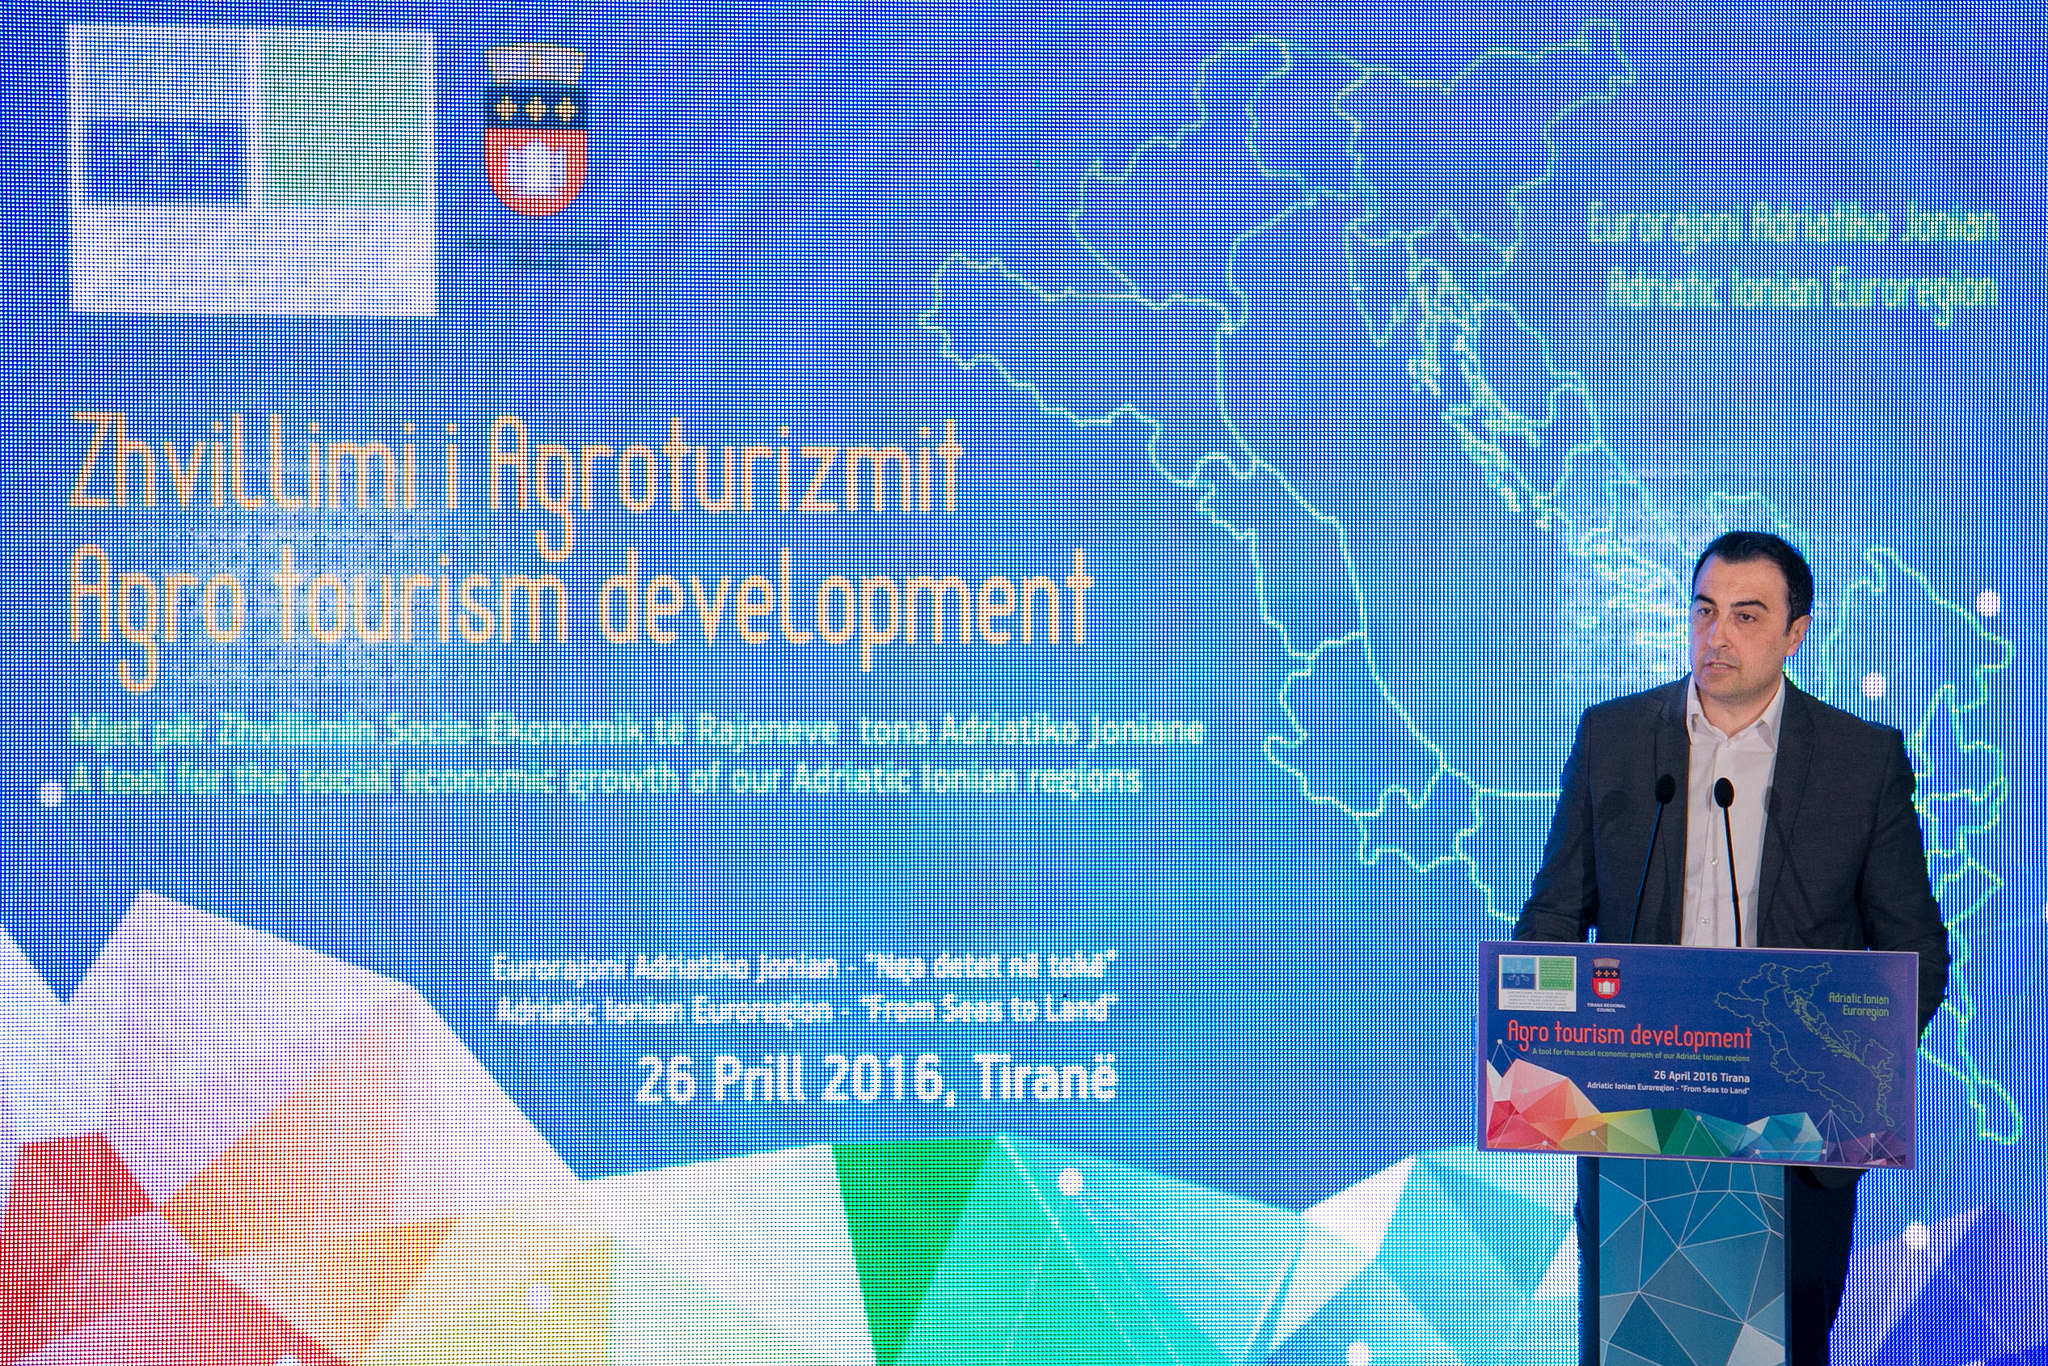 Conference: “Agro Tourism Development: a Tool for the Social Economic Growth of our Adriatic Ionian Regions”, 26 April 2016, Tirana 